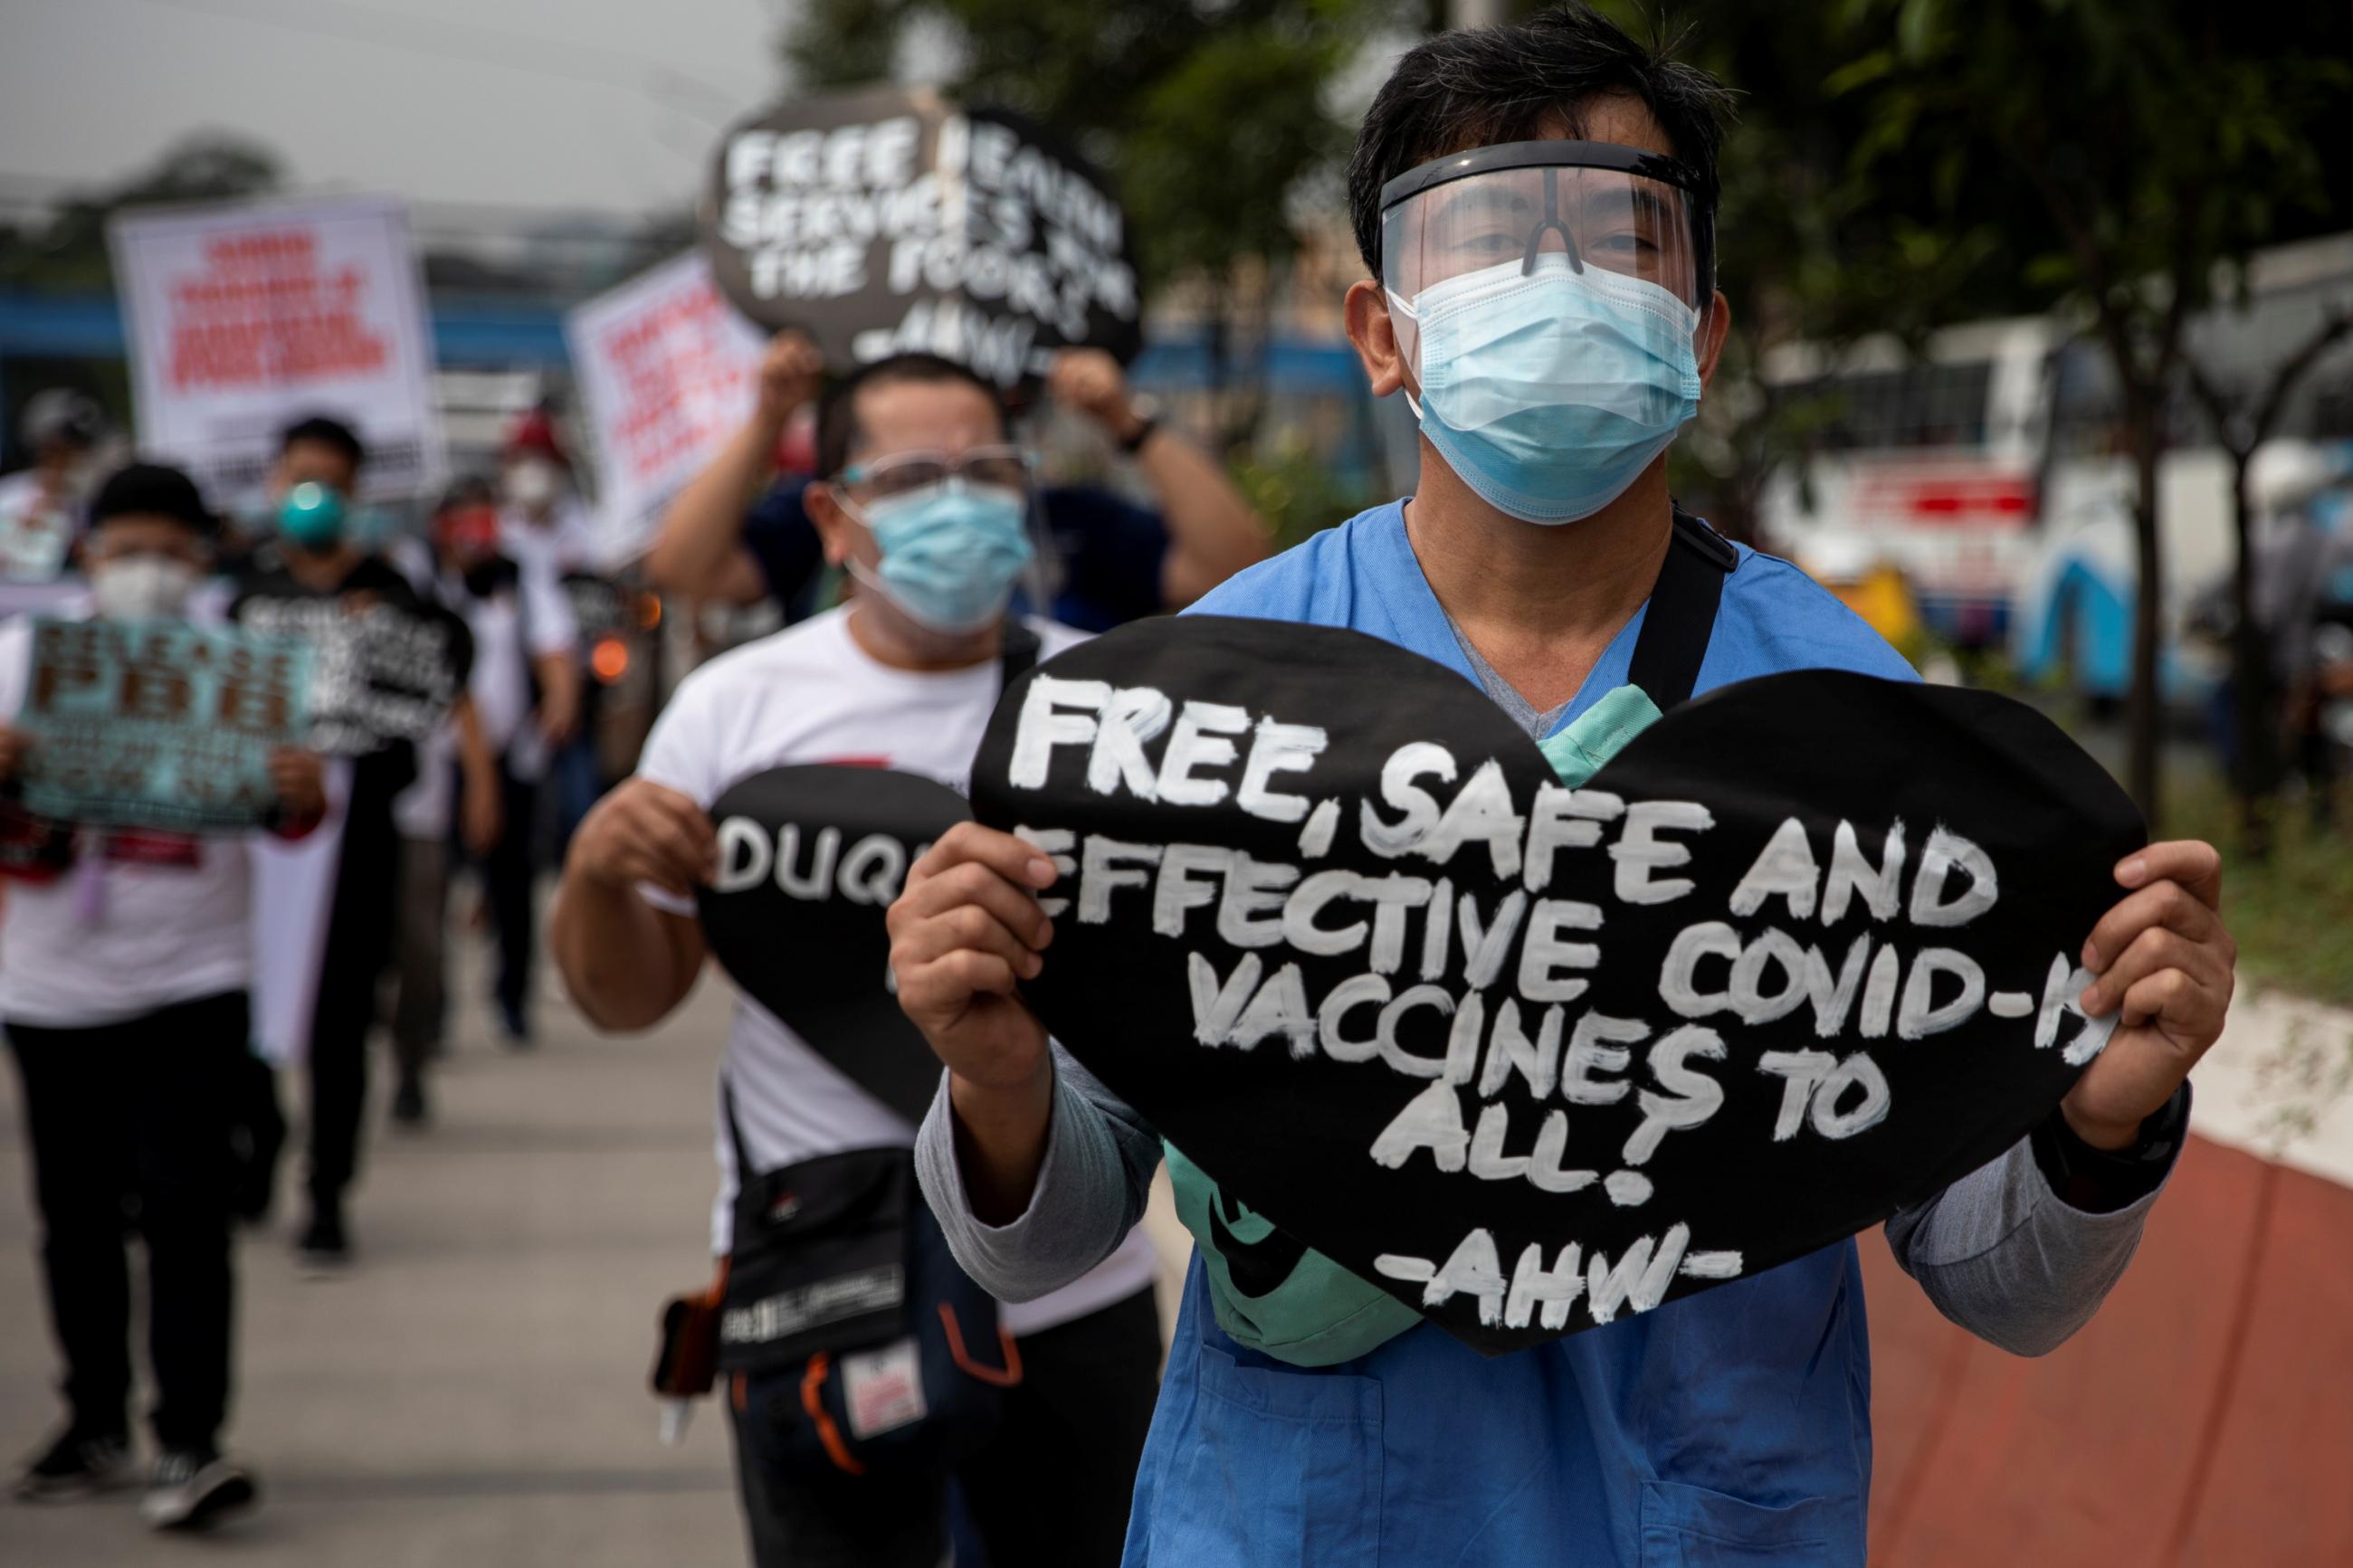 A health worker holds a placard calling for free, safe, and effective COVID-19 vaccines during a protest amid the coronavirus outbreak in Quezon City, Metro Manila, Philippines, February 15, 2021